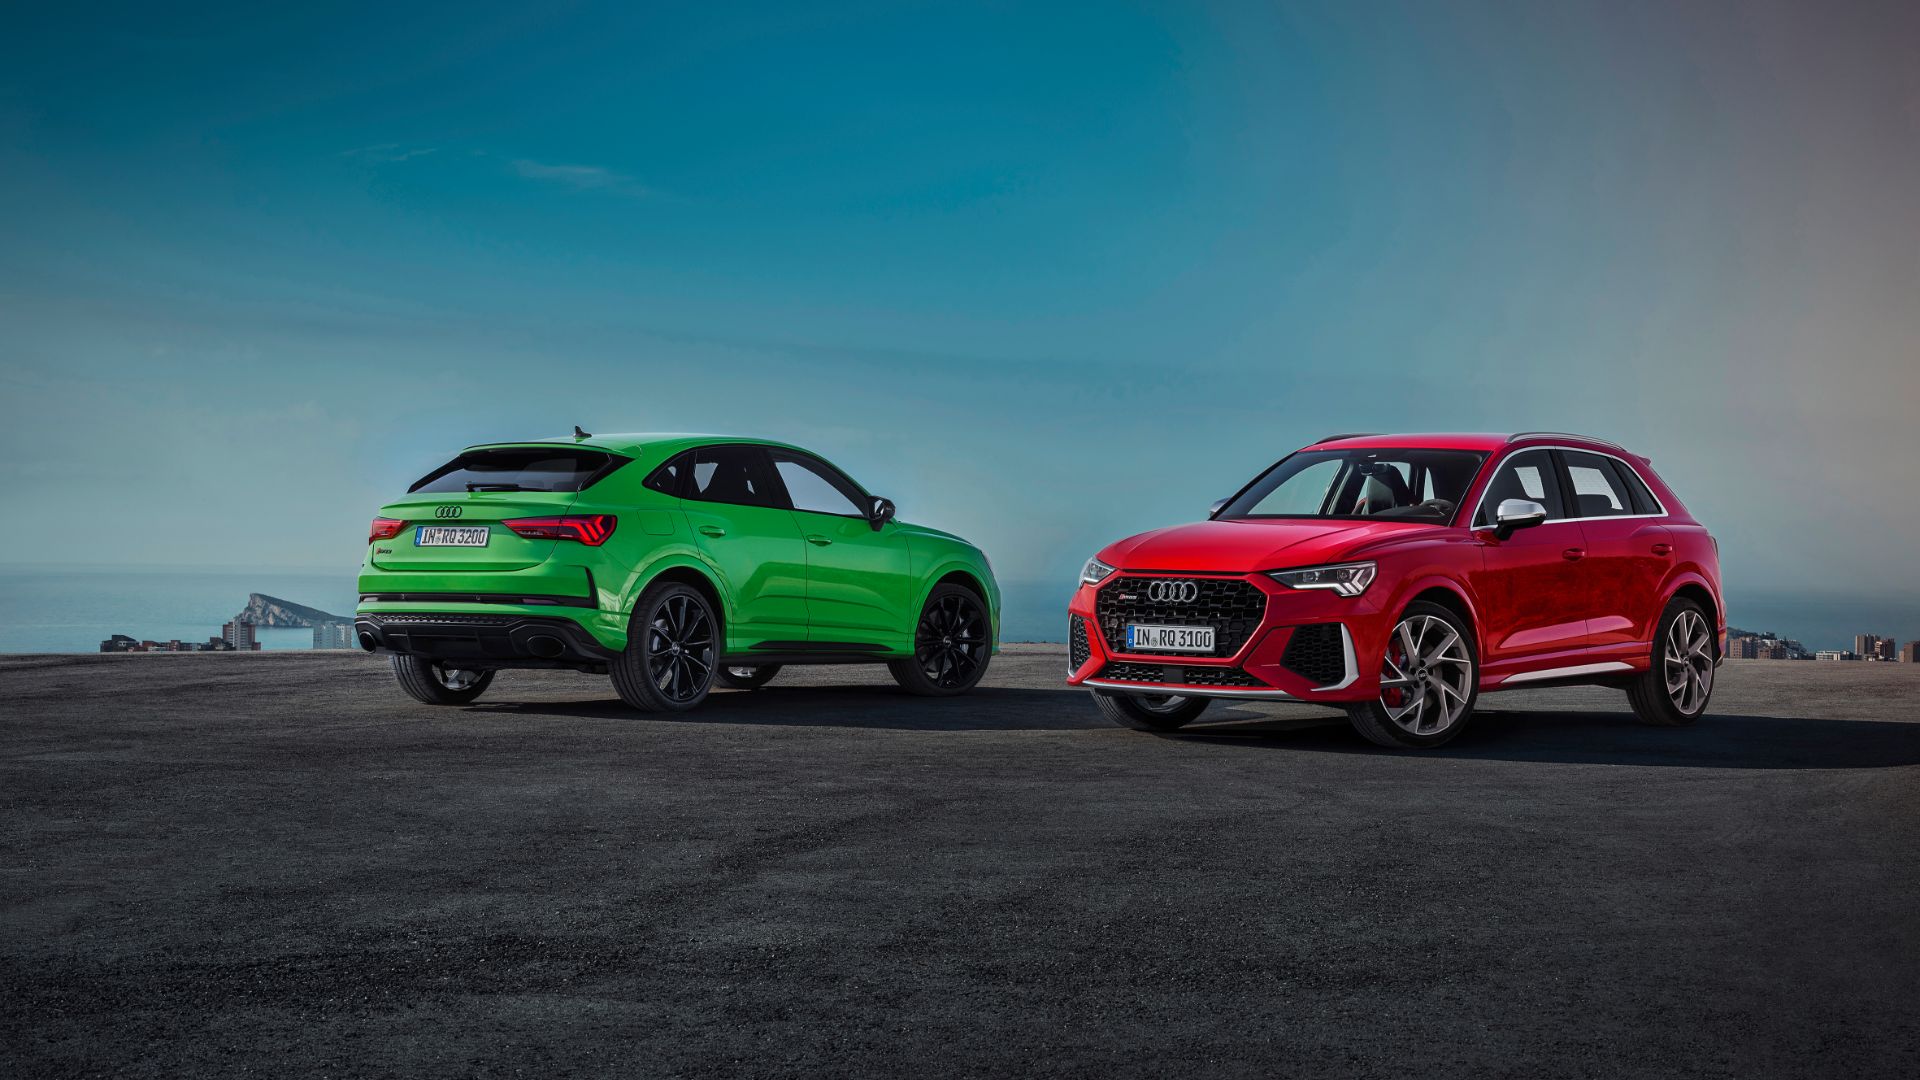 25 years of Audi RS